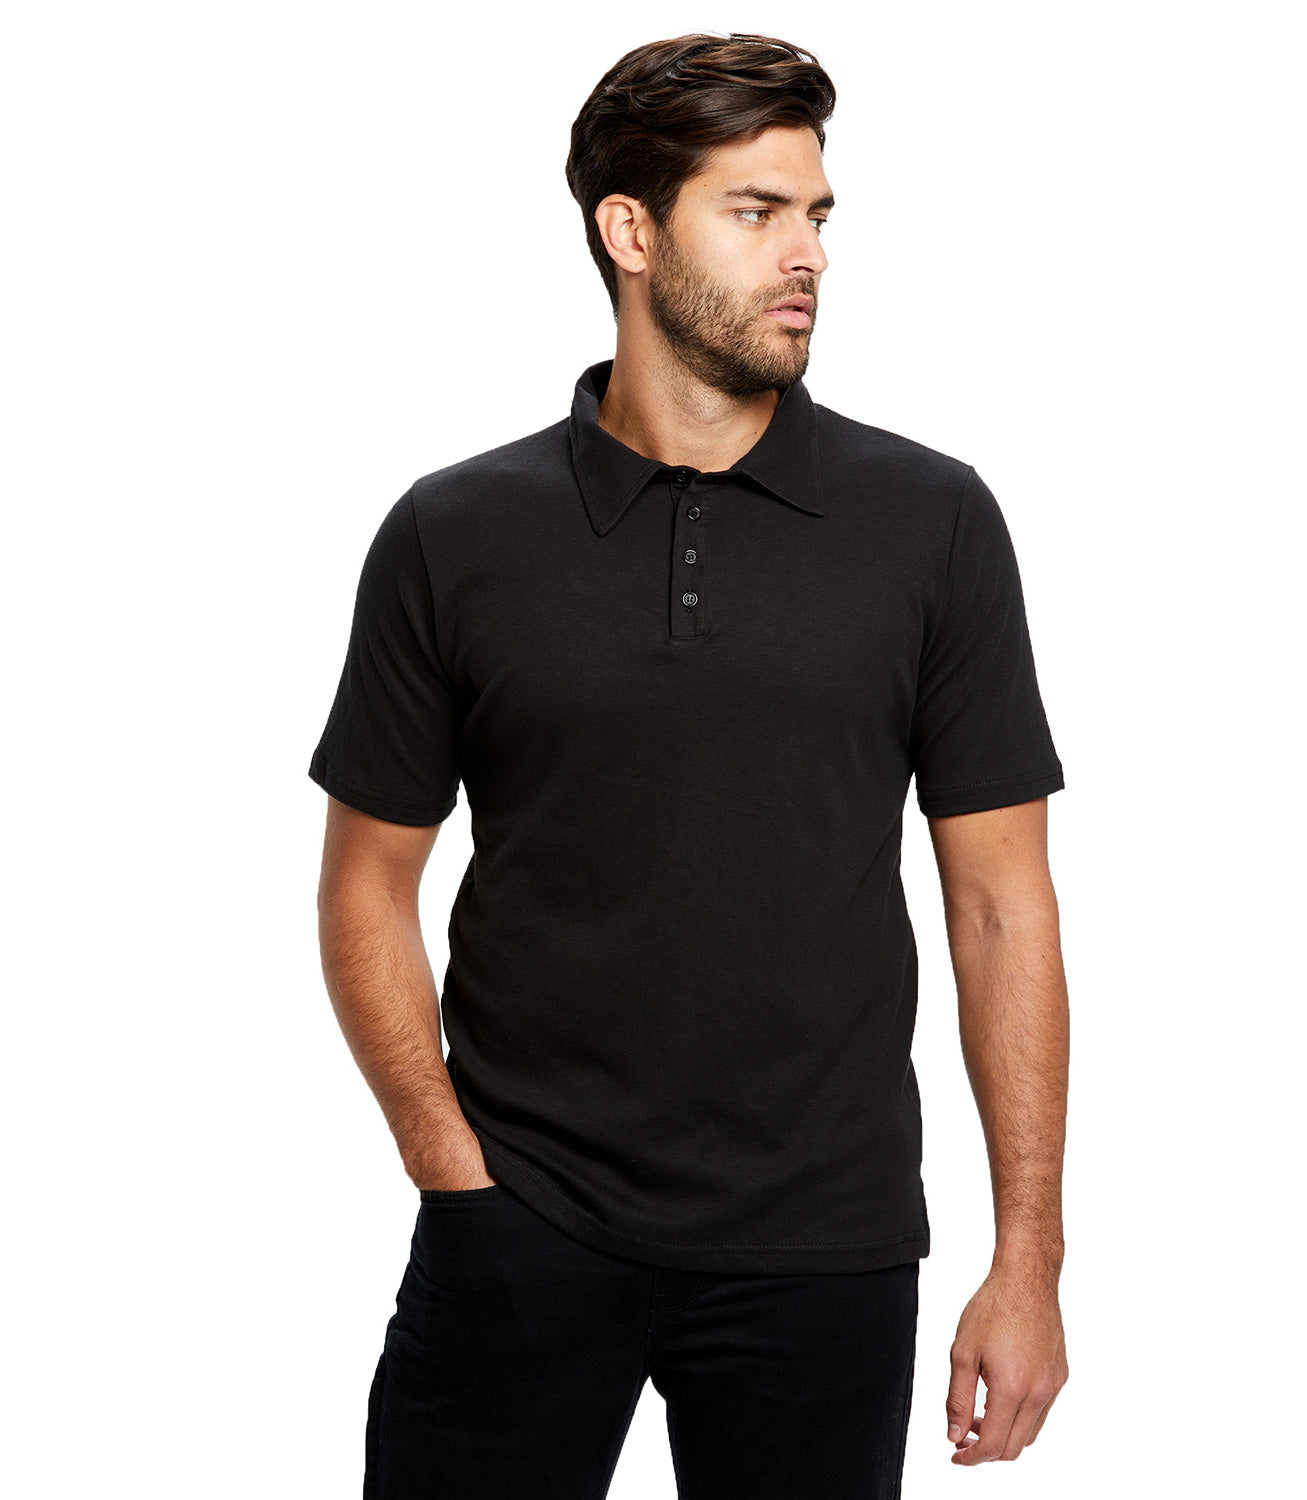 New Polo Shirt for Men Pure Cotton Embroidered Short Sleeve Black York  Leisure Sports Simple Europe the United States Loose Tops - AliExpress